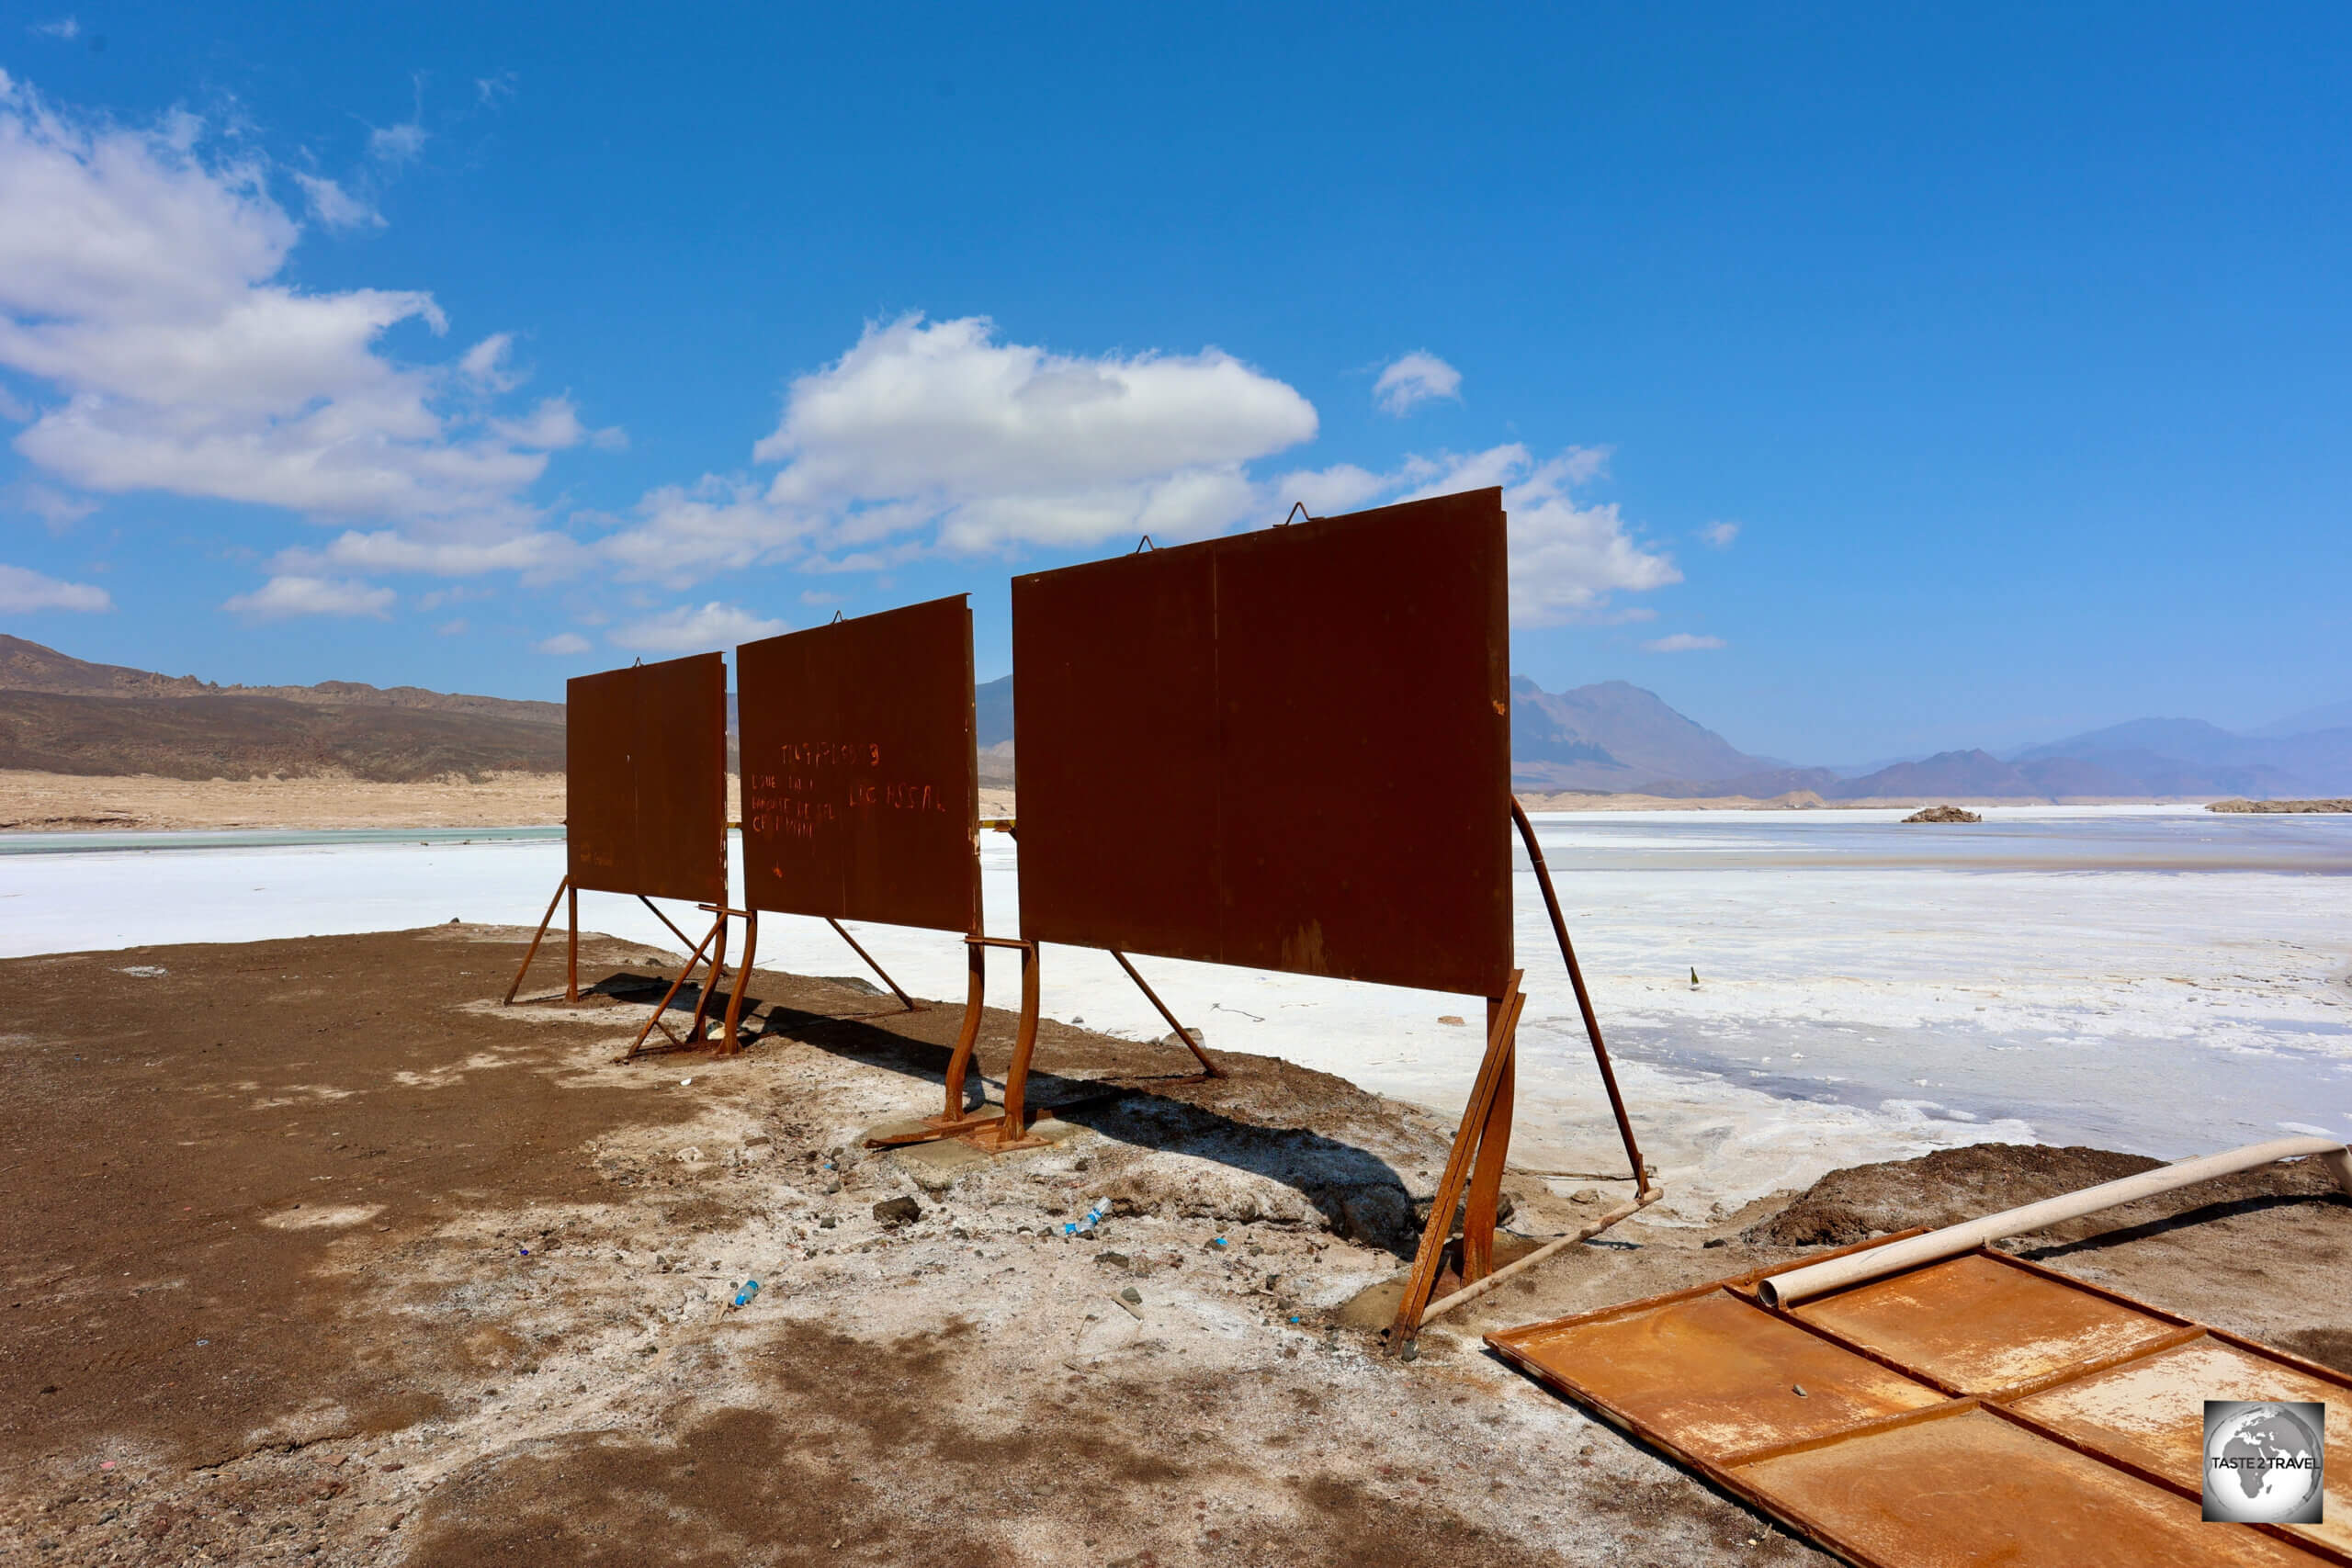 Any metallic surfaces simply rust in the corrosive air of lake Assal.